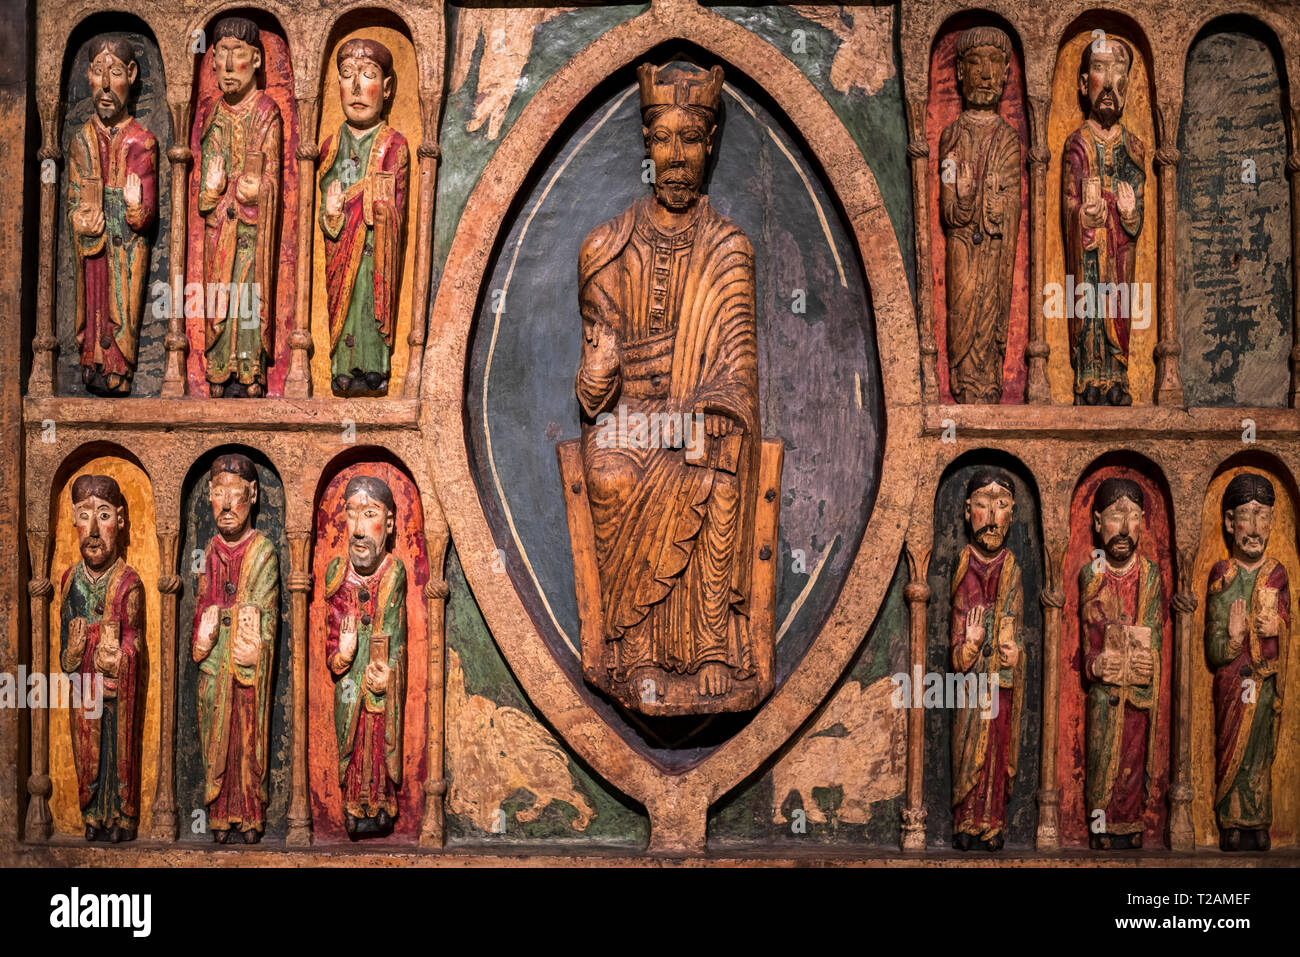 Romanesque art in the National Art Museum of Catalonia,Barcrelona,Altar frontal of Santa maria in Taüll (1200AC).Boí valley. Stock Photo